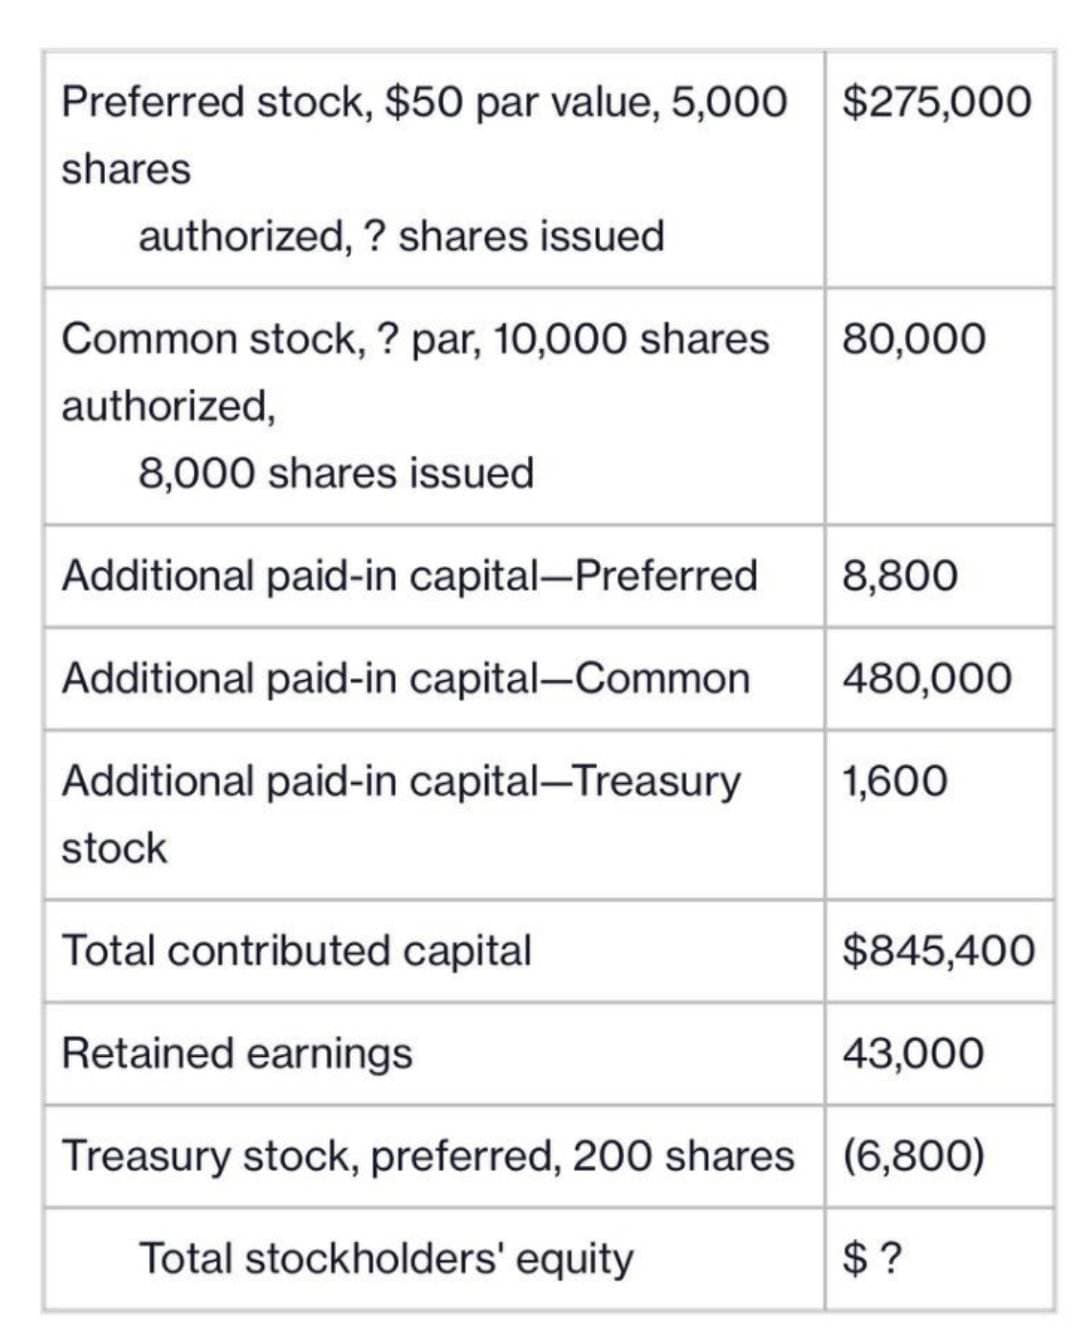 Preferred stock, $50 par value, 5,000 $275,000
shares
authorized,? shares issued
Common stock, ? par, 10,000 shares
authorized,
8,000 shares issued
Additional paid-in capital-Preferred
Additional paid-in capital-Common
Additional paid-in capital-Treasury
stock
80,000
8,800
480,000
1,600
Total contributed capital
Retained earnings
43,000
Treasury stock, preferred, 200 shares (6,800)
Total stockholders' equity
$845,400
$?